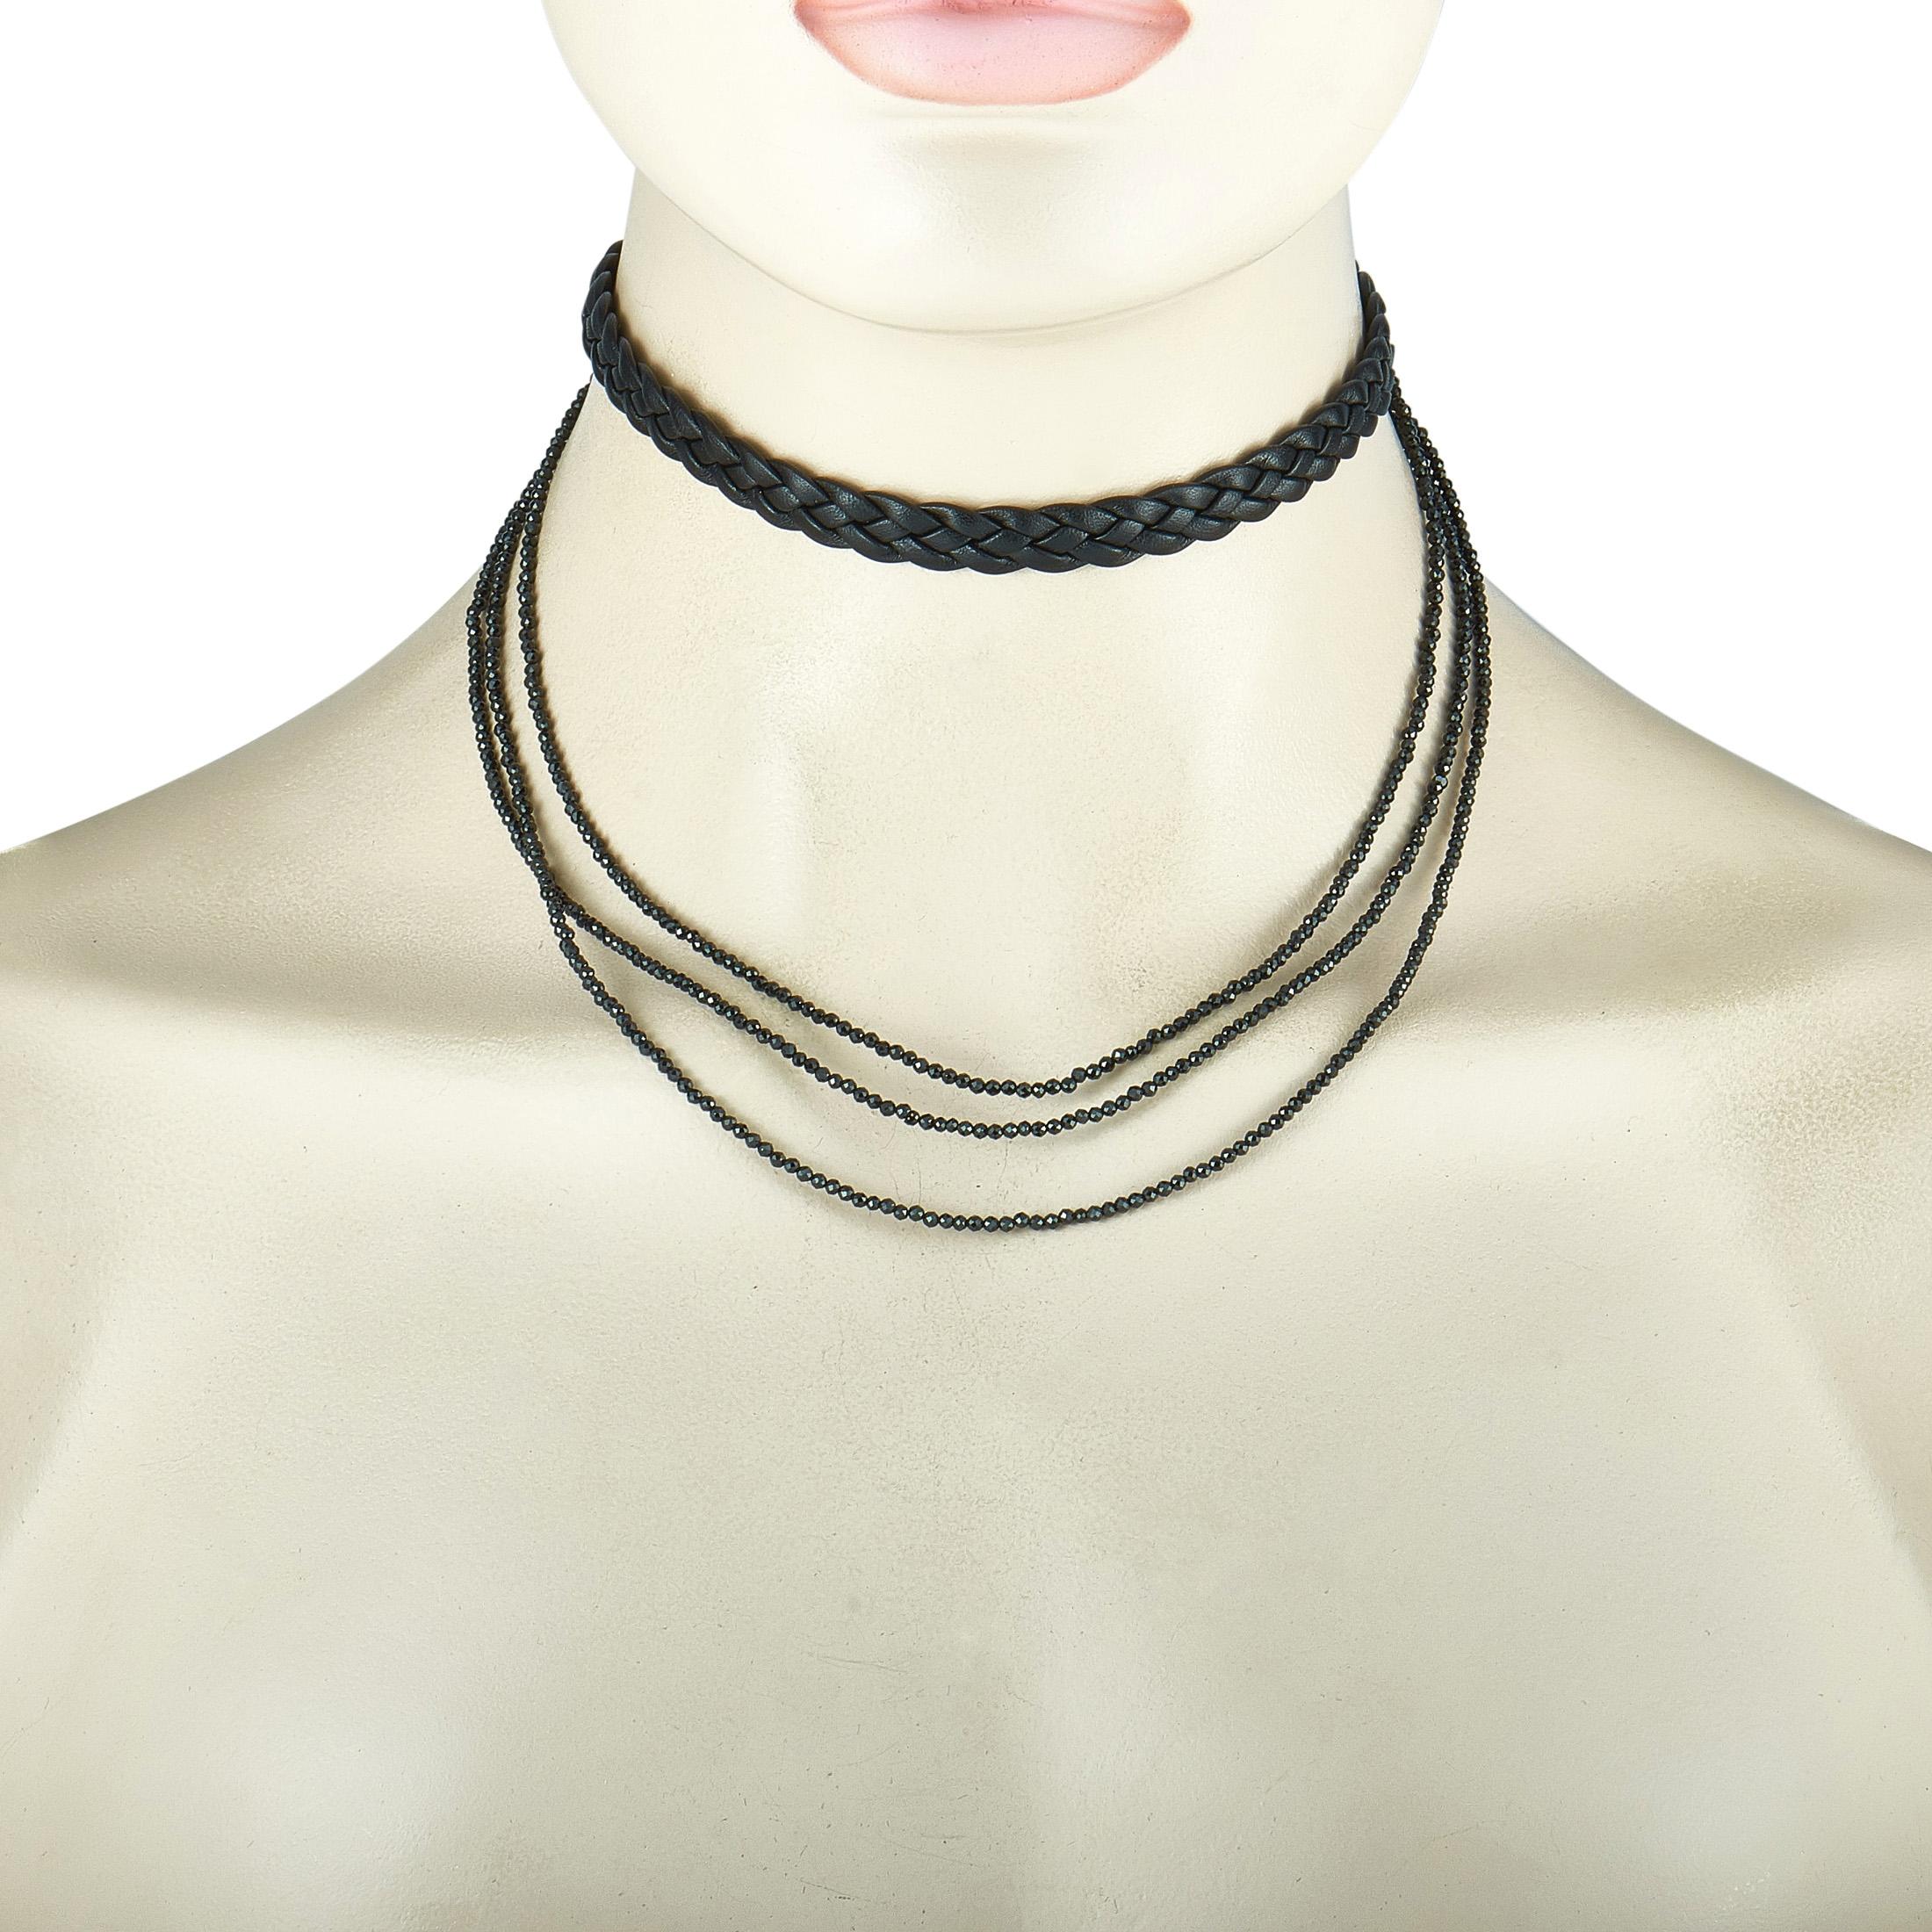 This King Baby necklace is made out of sterling silver, black leather, and spinels. The necklace weighs 23.7 grams, and the leather choker measures 11.50” in length.

Offered in brand new condition, this item includes the manufacturer’s pouch.